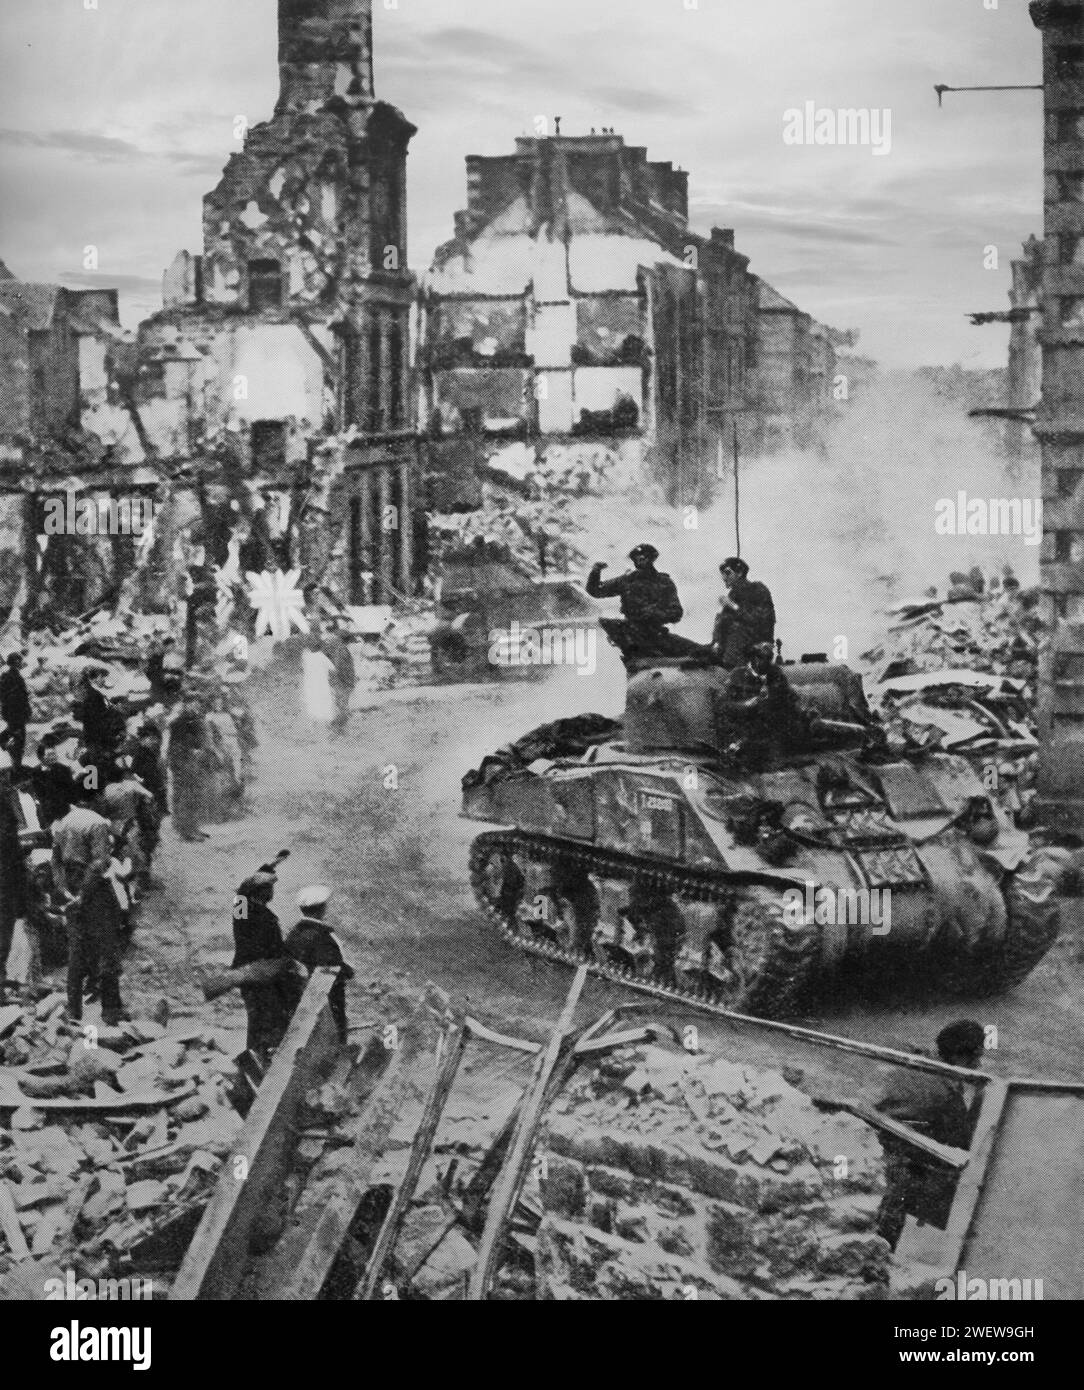 Tanks pass through the ruins of the Normandy town of Flers on the 17th August 1944, part of the allied invasion of Europe during the Second World War. Stock Photo